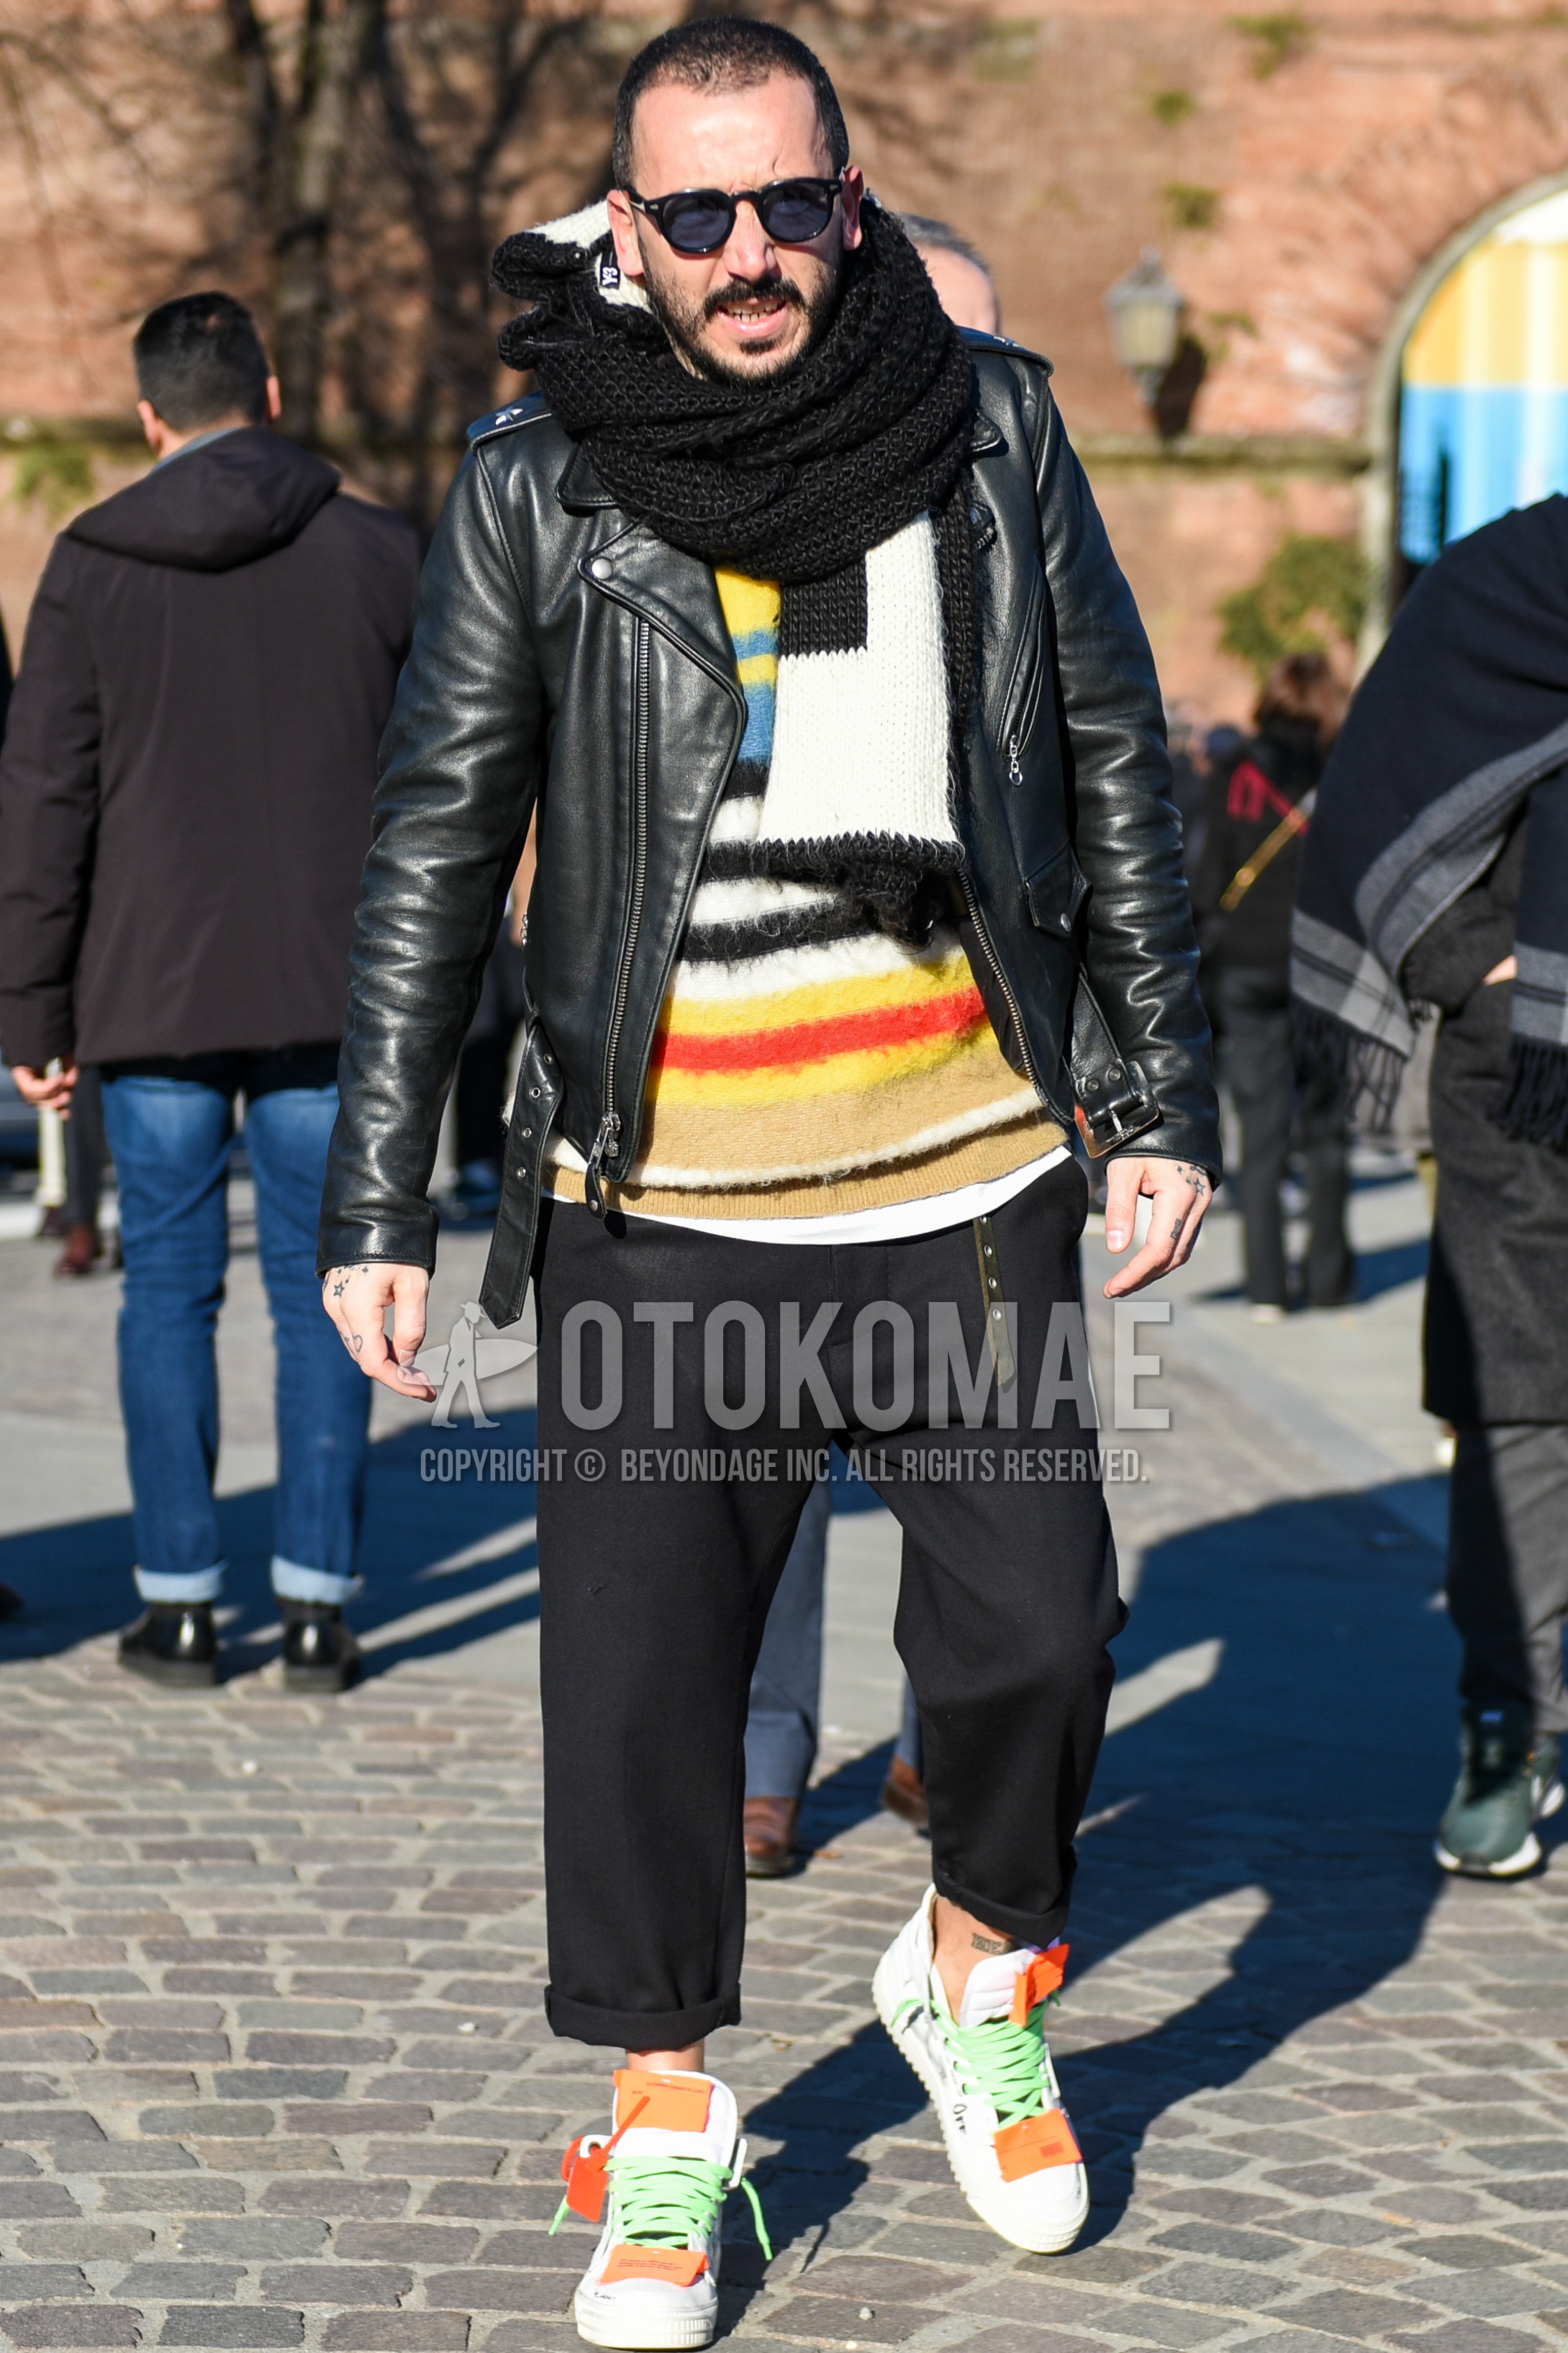 Men's autumn winter outfit with black plain sunglasses, black plain scarf, black plain riders jacket, multi-color tops/innerwear sweater, dark gray plain slacks, dark gray plain cropped pants, white high-cut sneakers.